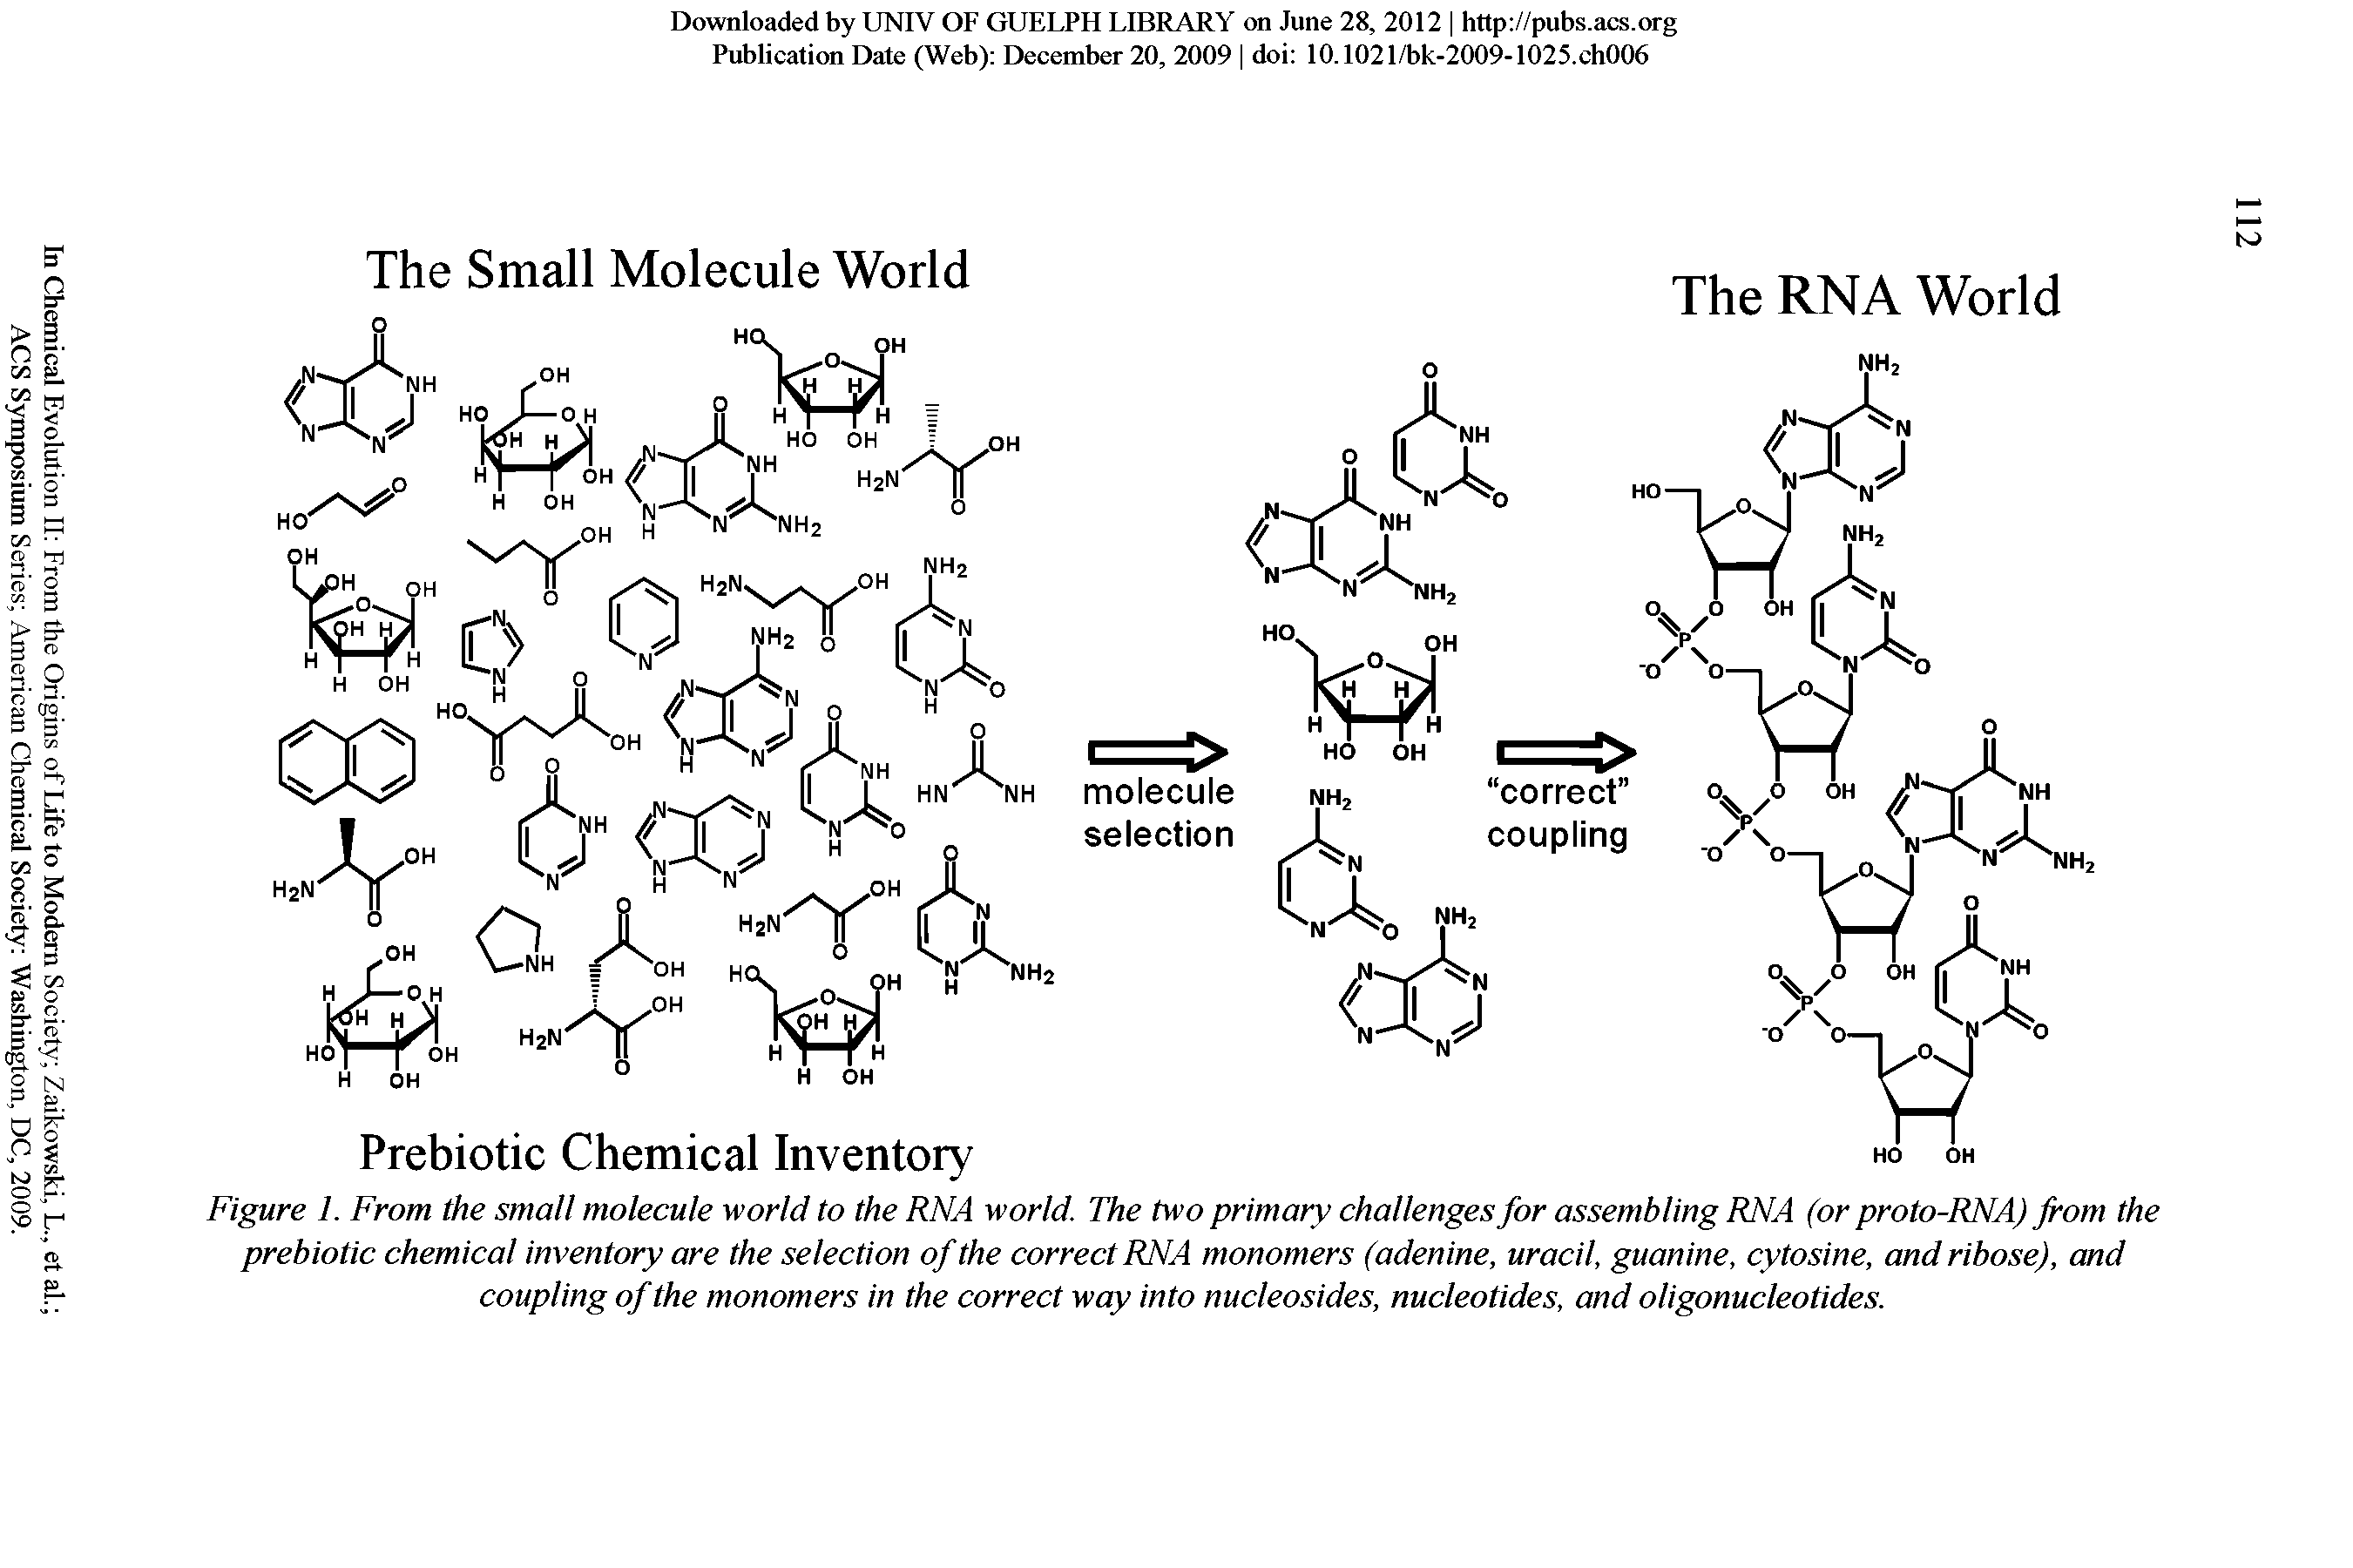 Figure 1. From the small molecule world to the RNA world. The two primary challenges for assembling RNA (or proto-RNA) from the prebiotic chemical inventory are the selection of the correct RNA monomers (adenine, uracil, guanine, cytosine, and ribose), and coupling of the monomers in the correct way into nucleosides, nucleotides, and oligonucleotides.